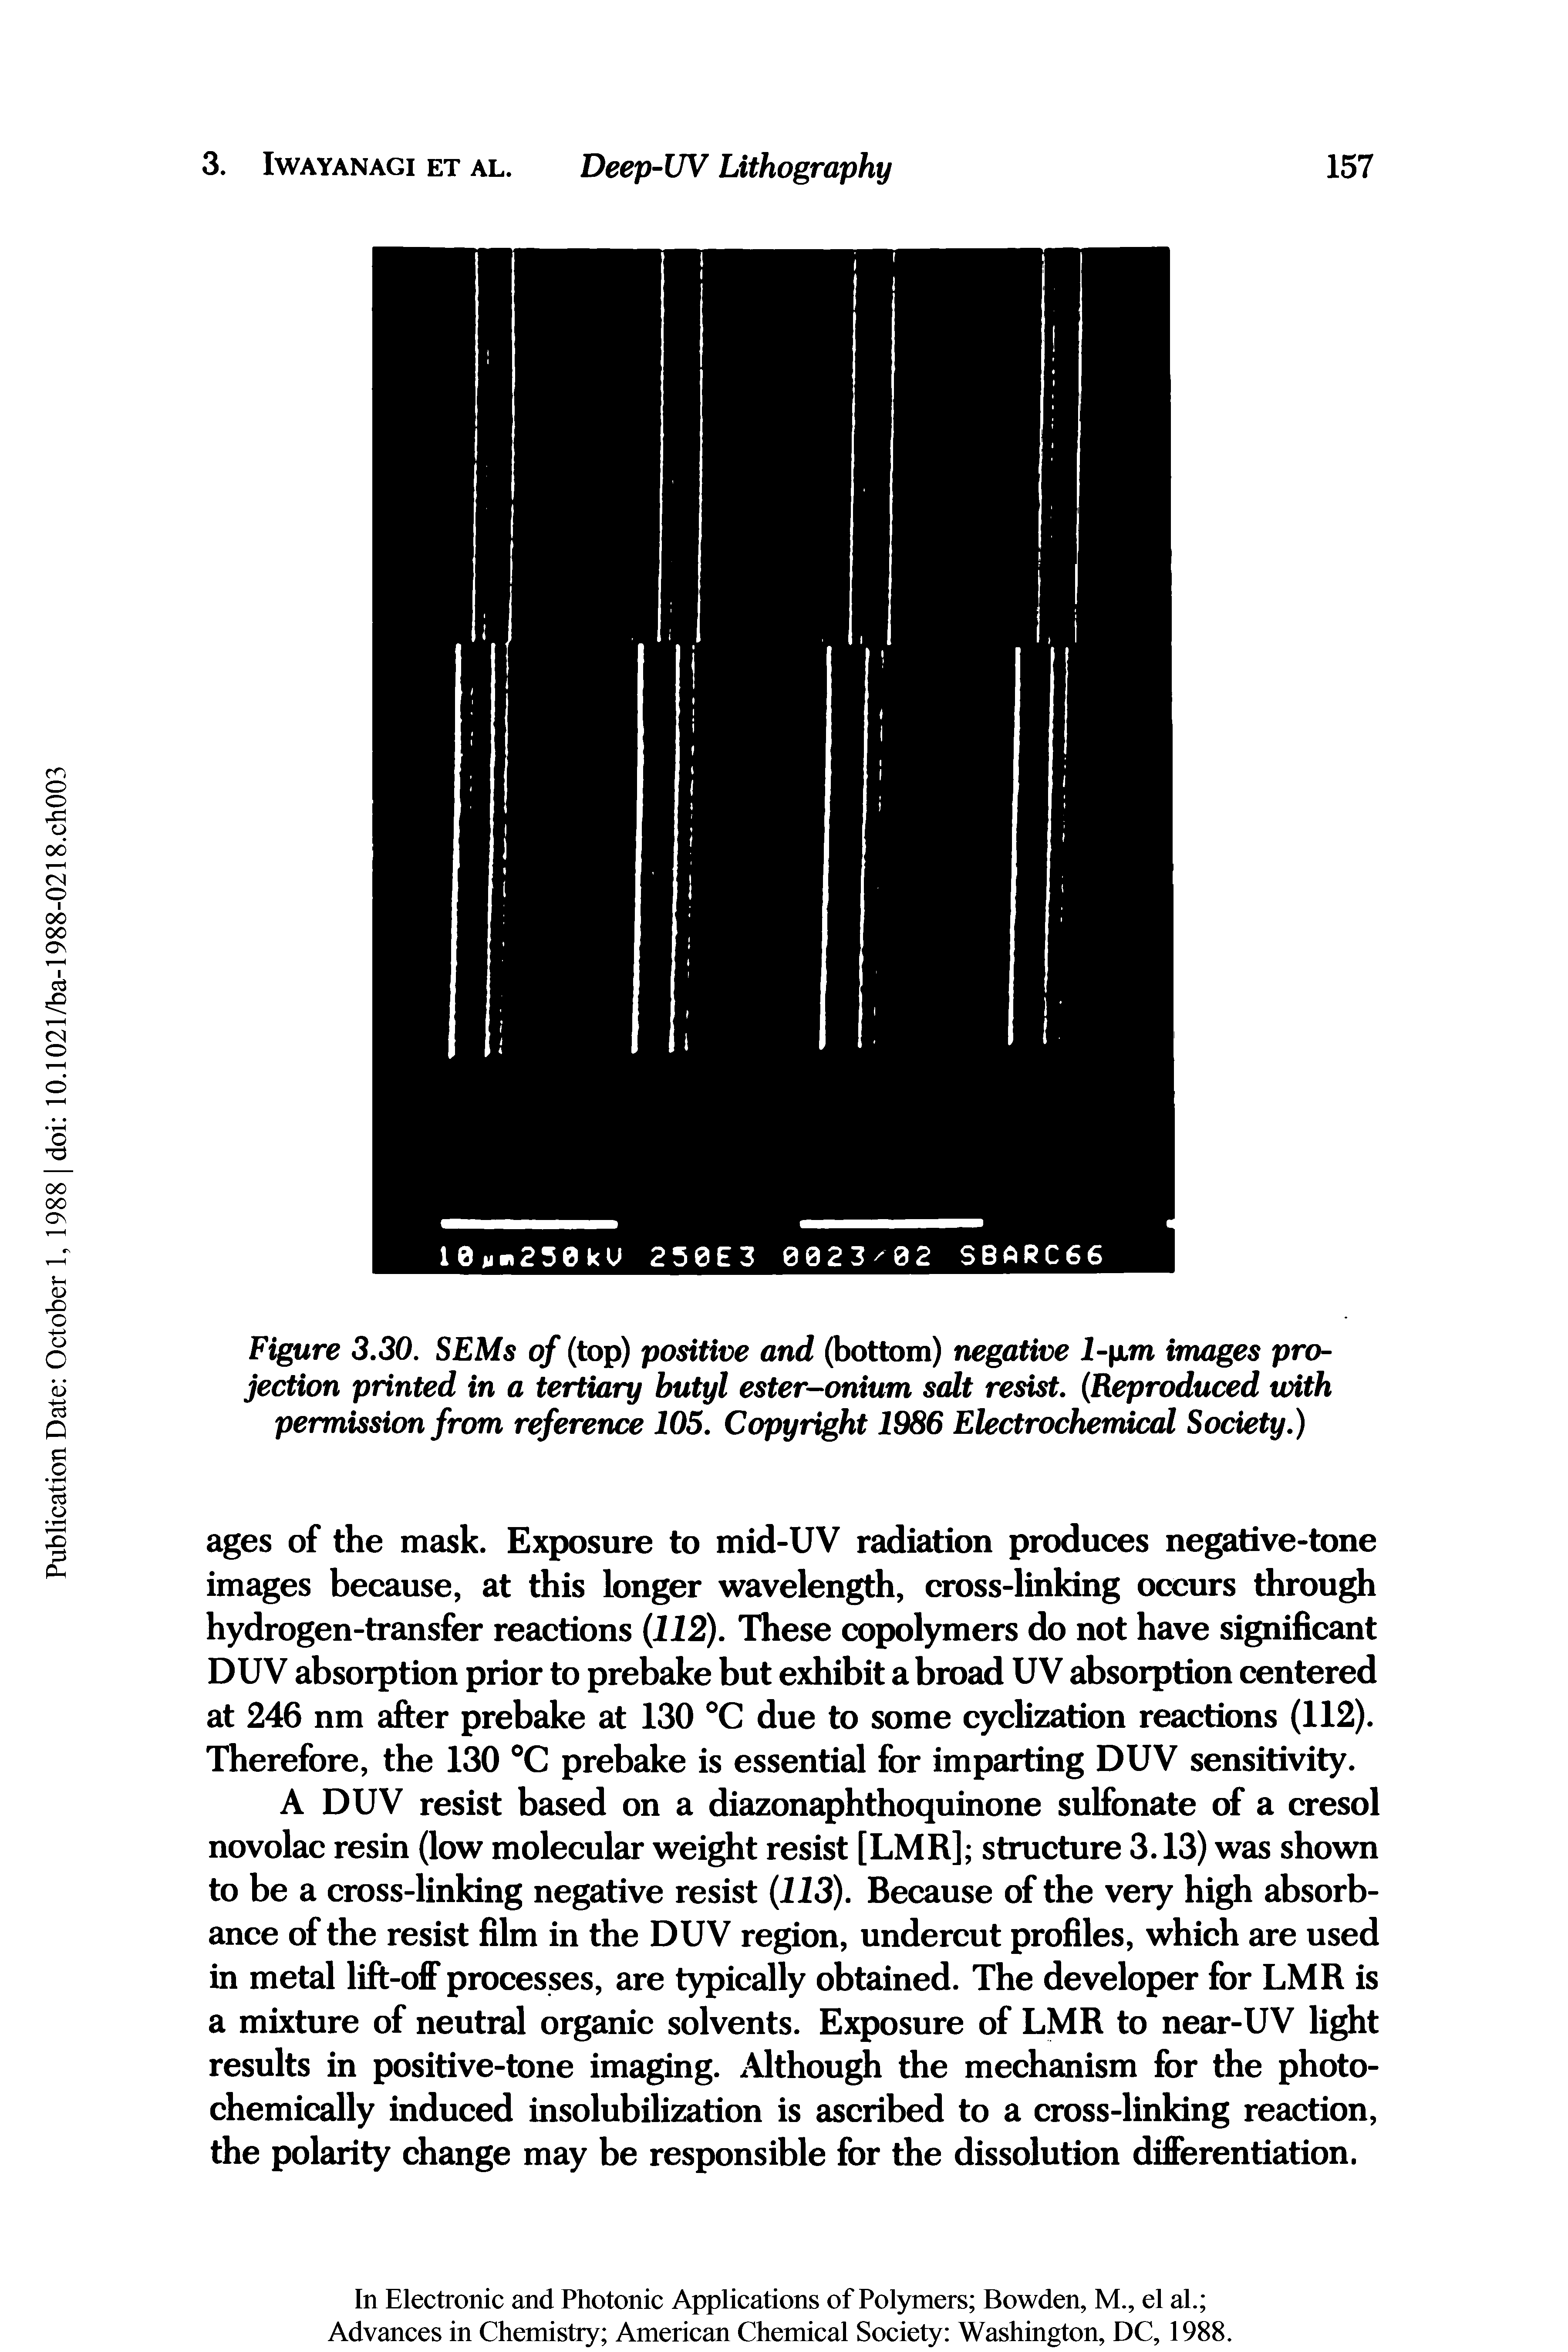 Figure 3.30. SEMs of (top) positive and (bottom) negative J- xm images projection printed in a tertiary butyl ester-onium salt resist. Reproduced with permission from reference 105. Copyright 1986 Electrochemical Society.)...